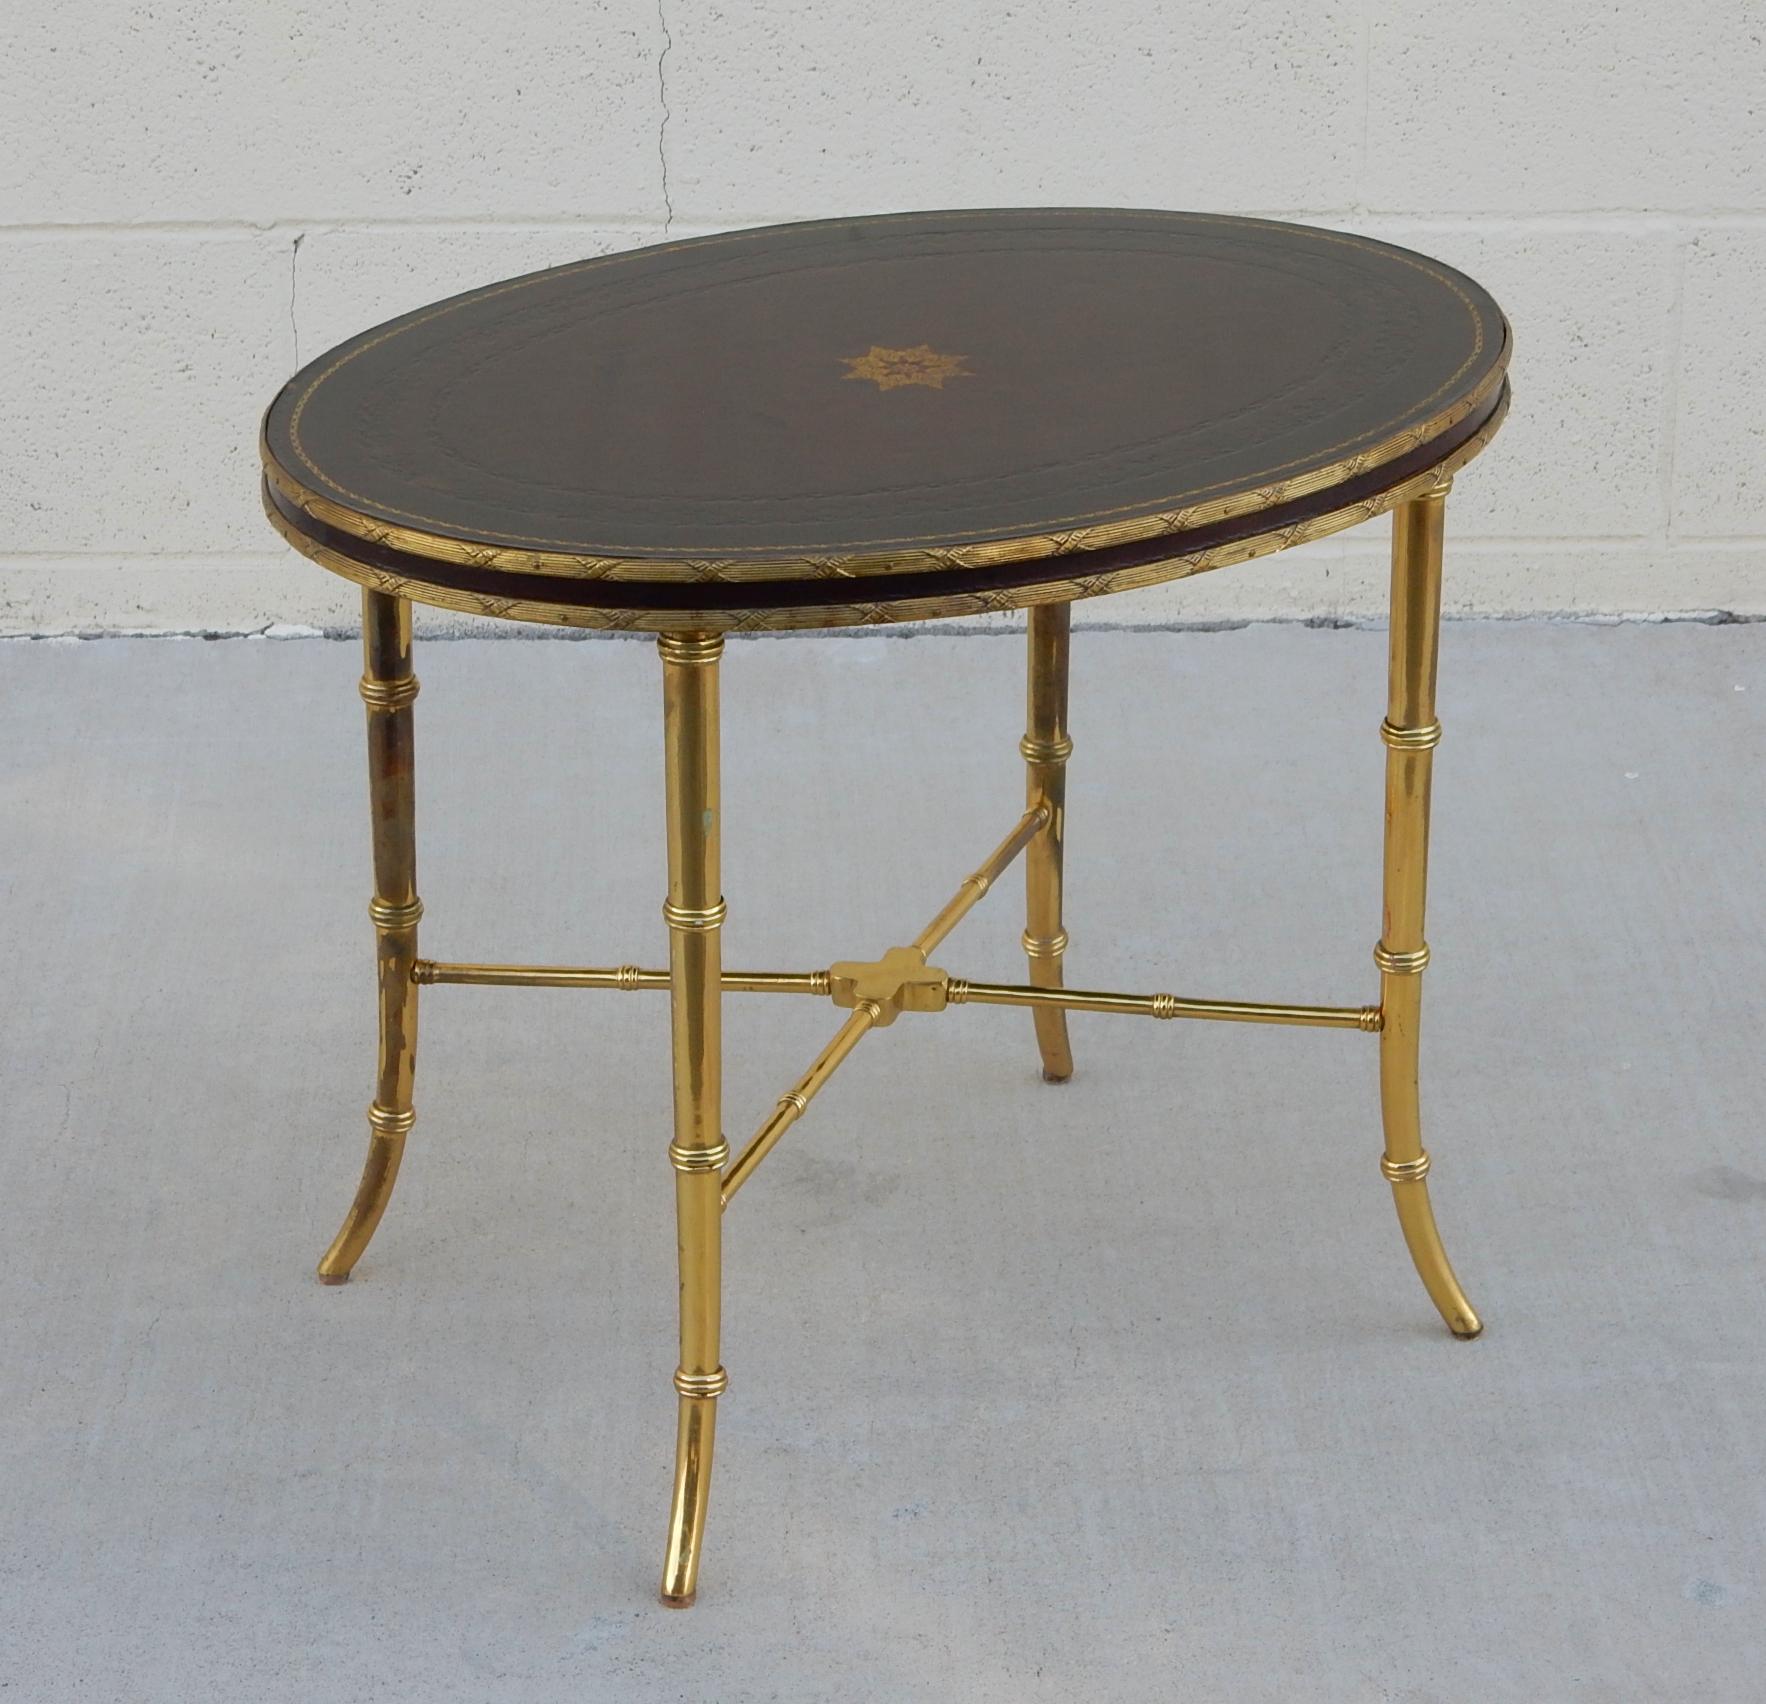 Fabulous occasional table by Maitland-Smith circa 1980.
Brown leather with banded trim.
Base is brass faux bamboo legs with cross supports.
Tagged, signed on bottom, Maitland-Smith.